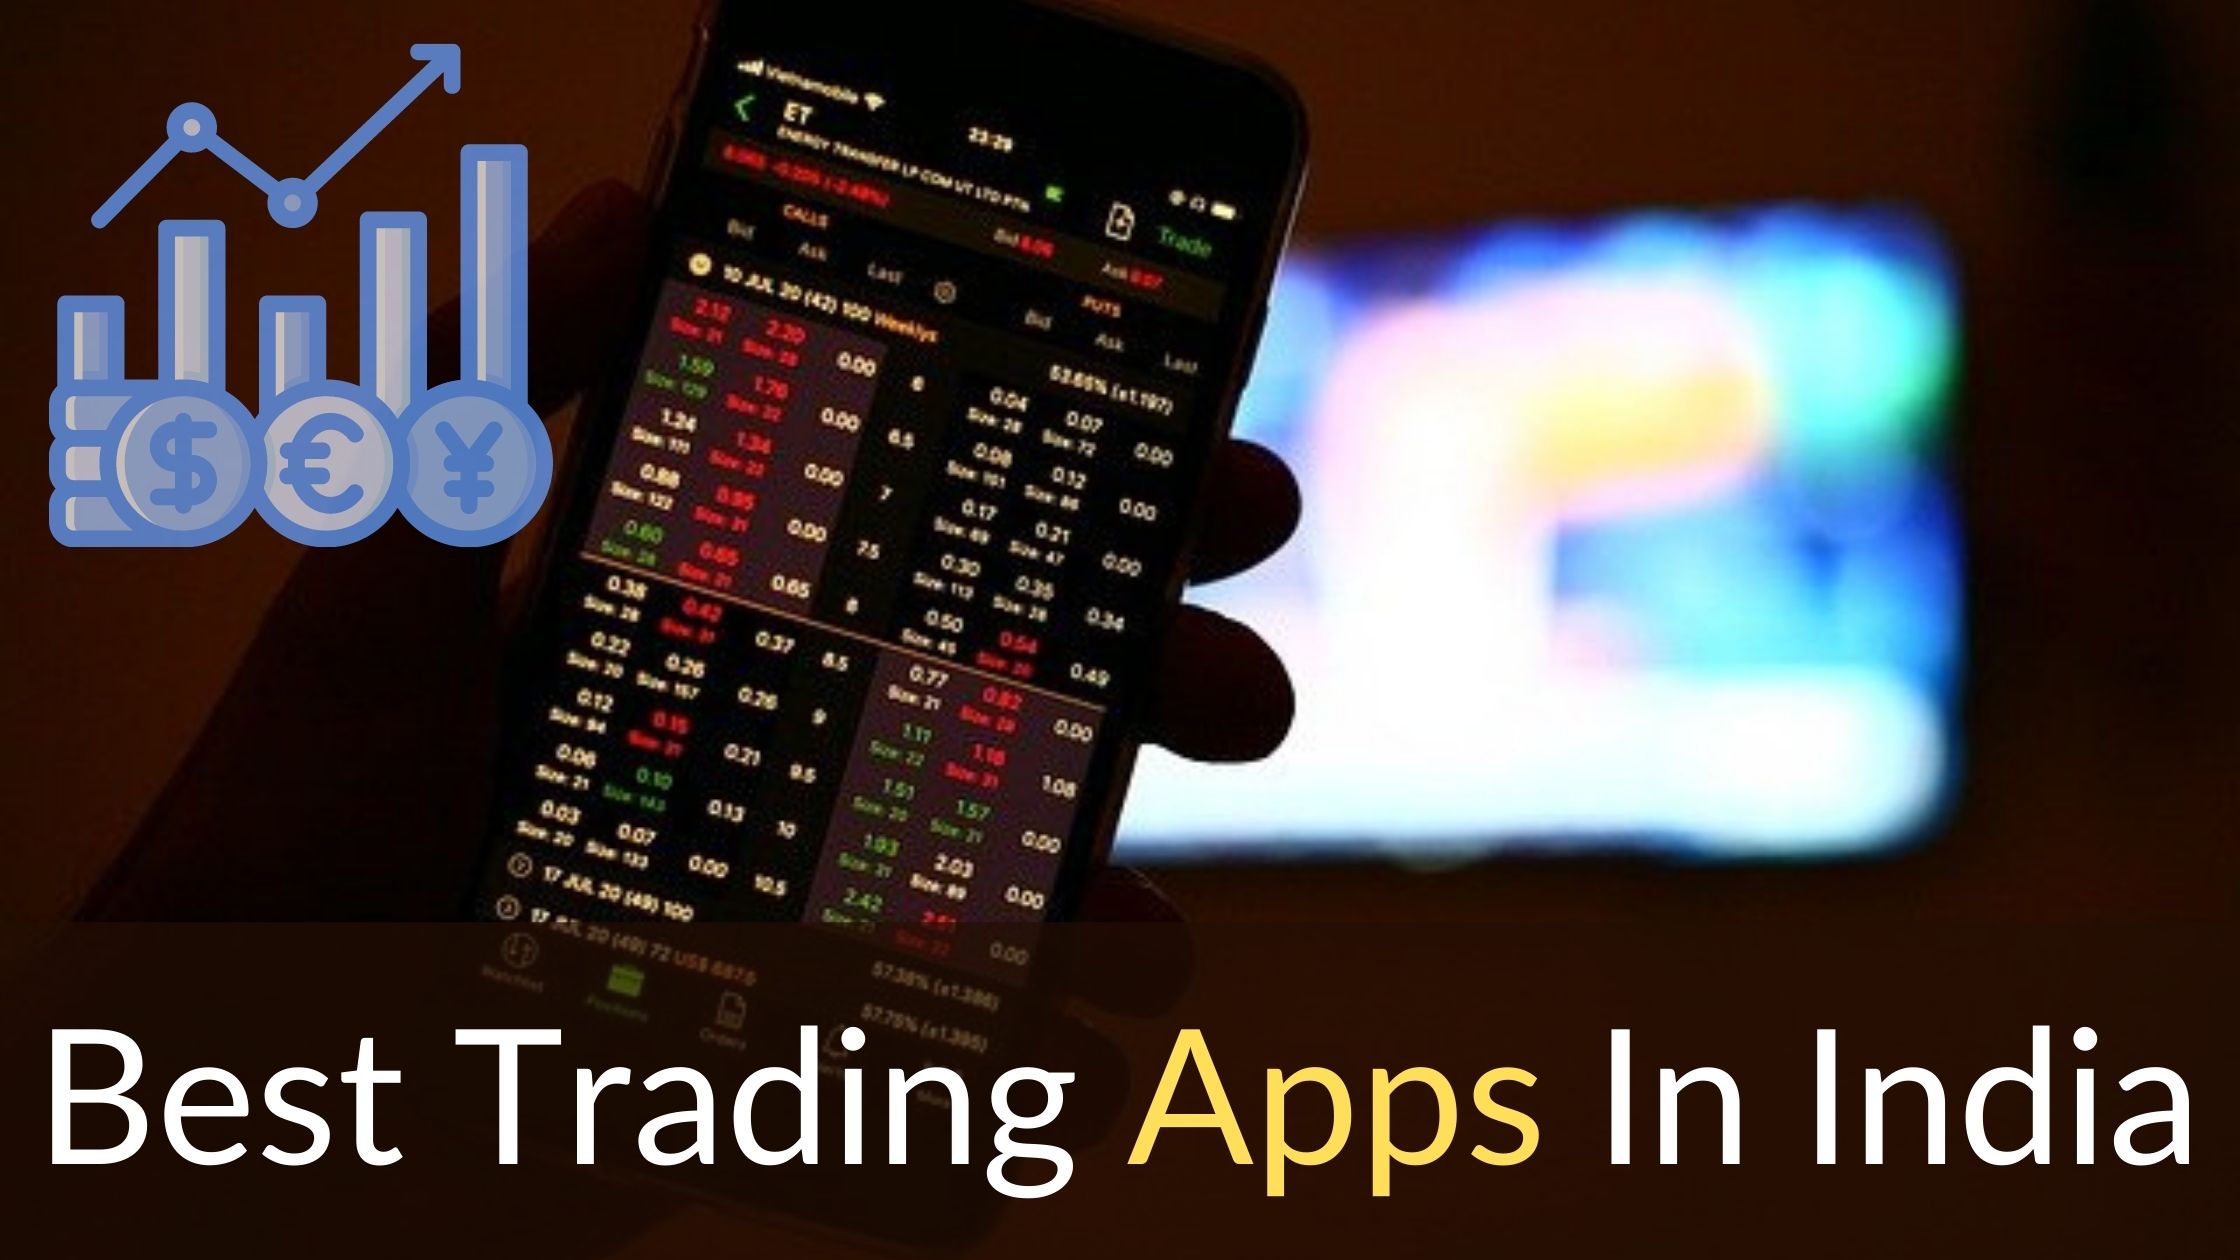 10 Best Trading Apps In India